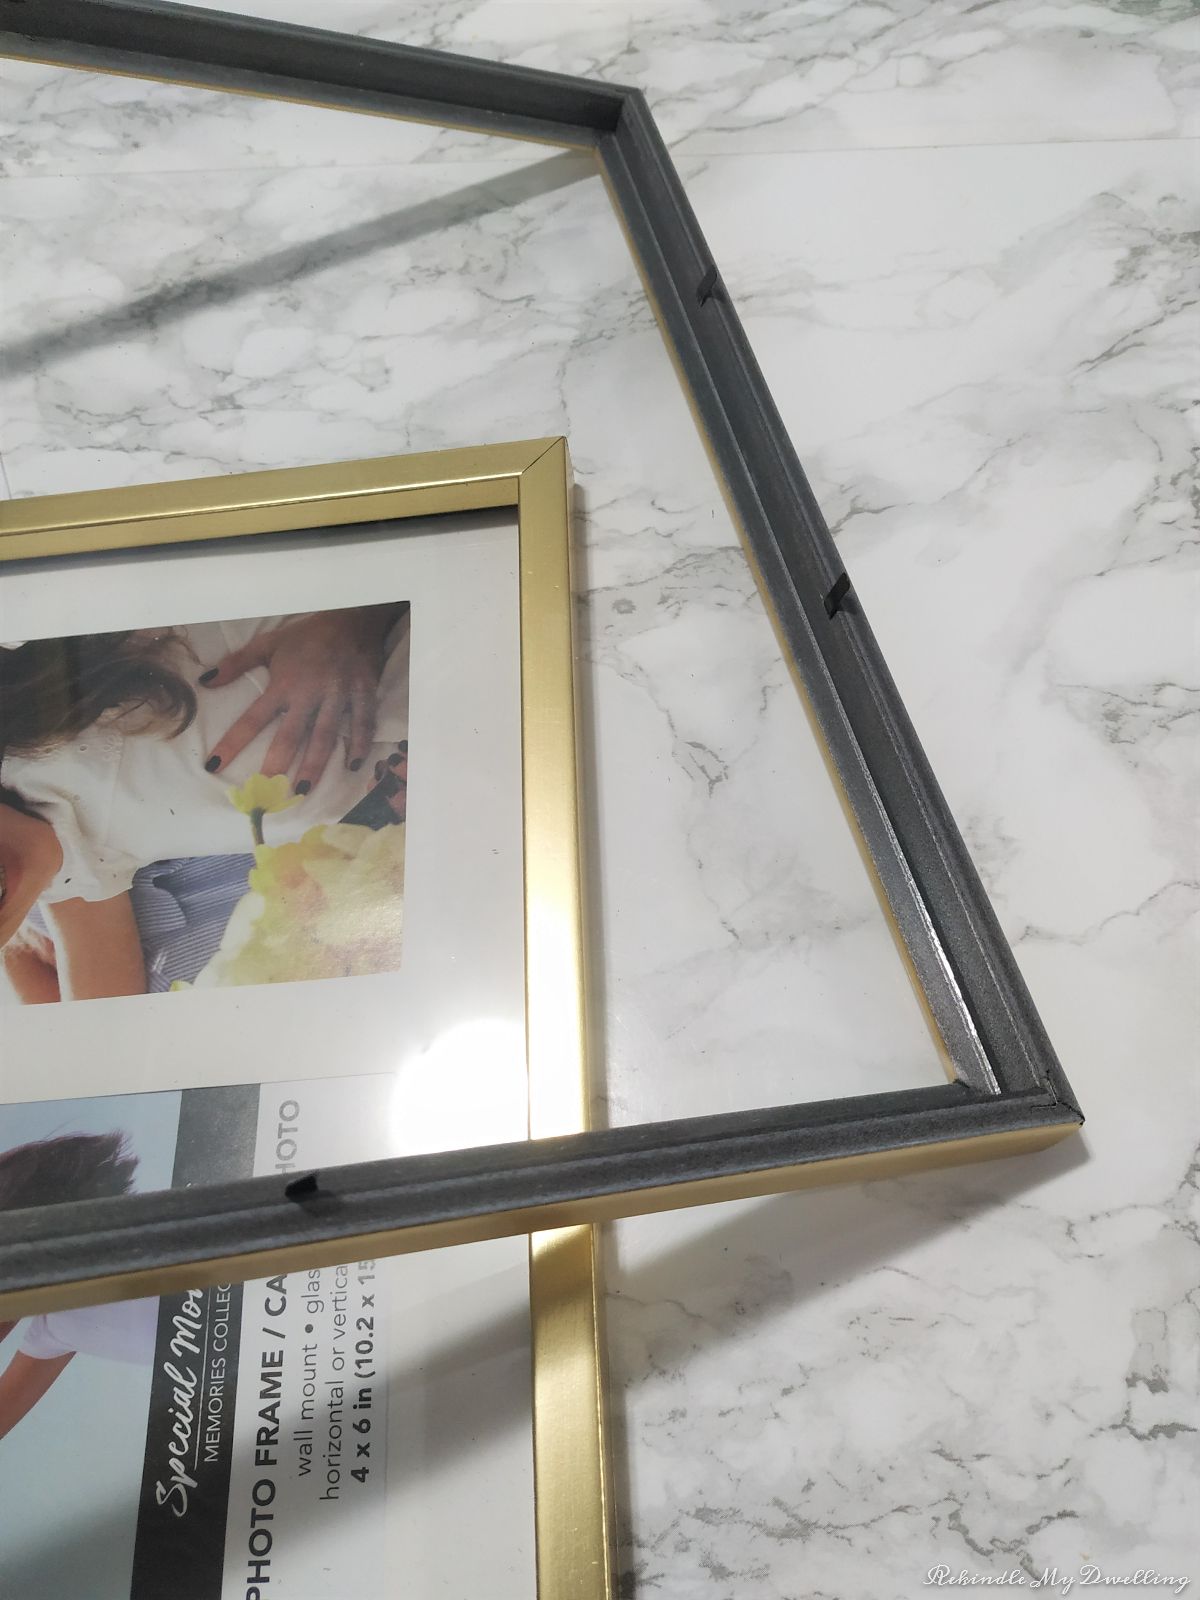 Removing the backing and glass from the picture frame.